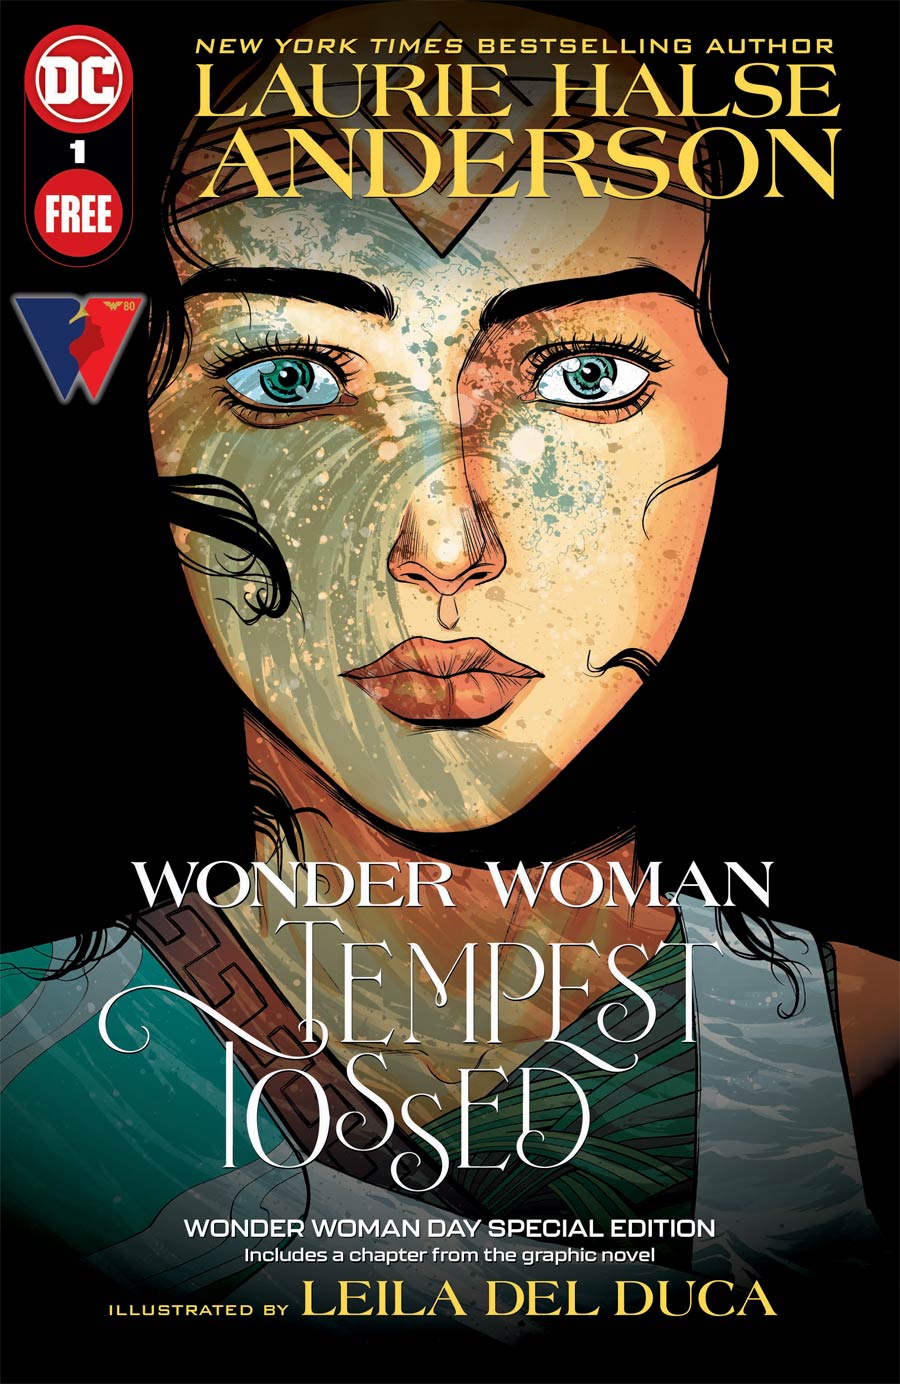 Wonder Woman Tempest Tossed Wonder Woman Day Special Edition #1 (One Shot) - FREE - Limit 1 Per Customer